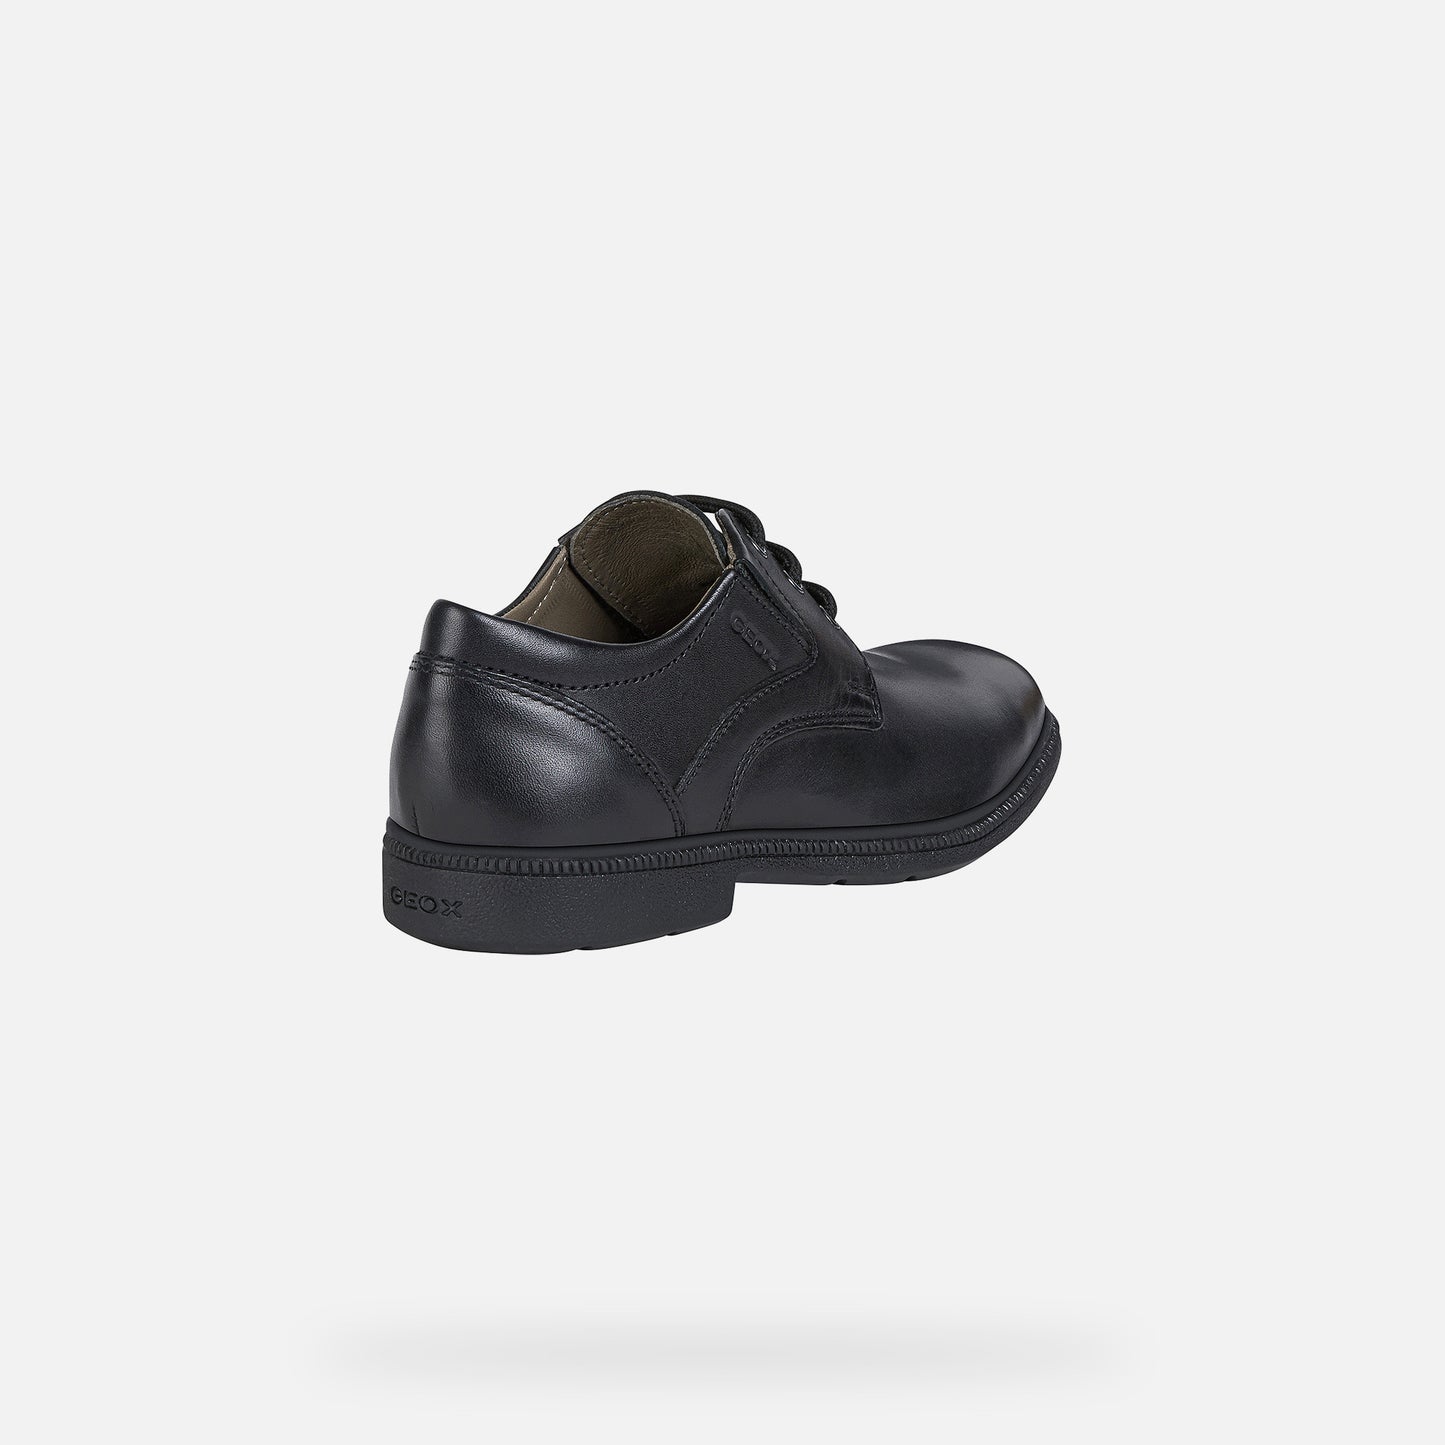 A boys smart school shoe by Geox,style J Federico, in black with lace fastening. Back view.